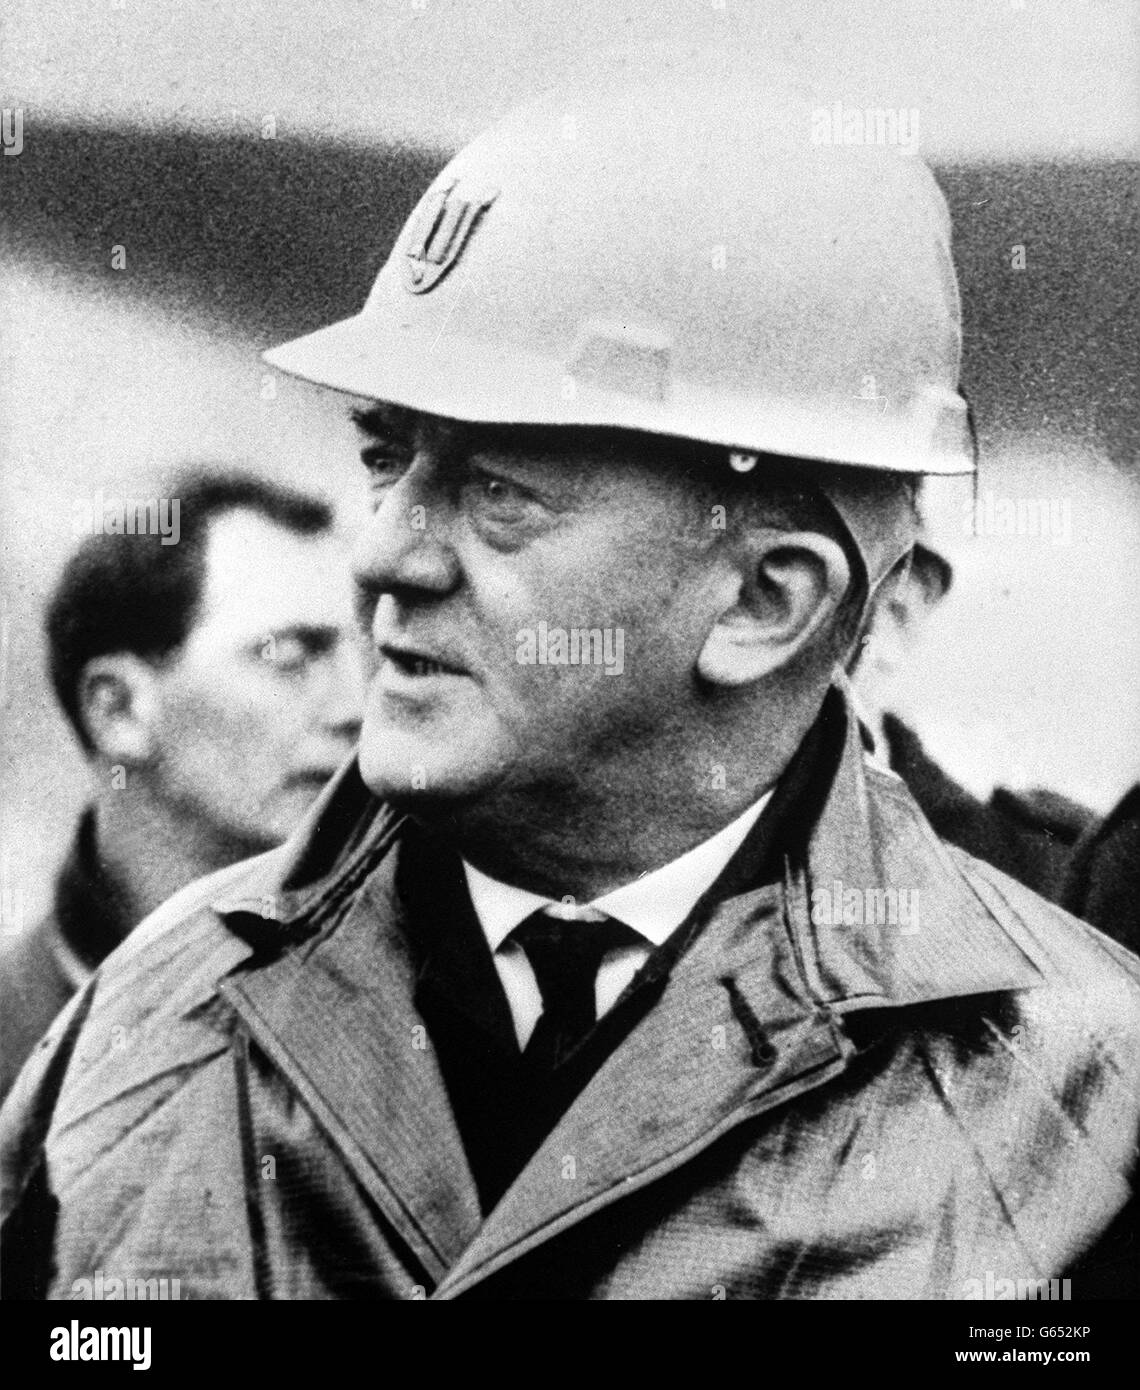 Wearing a white protective helmet and black waterproof coat, Lord Justice Edmund Davies, Chairman of the tribunal of inquiry into the Aberfan coal-tip disaster. Stock Photo